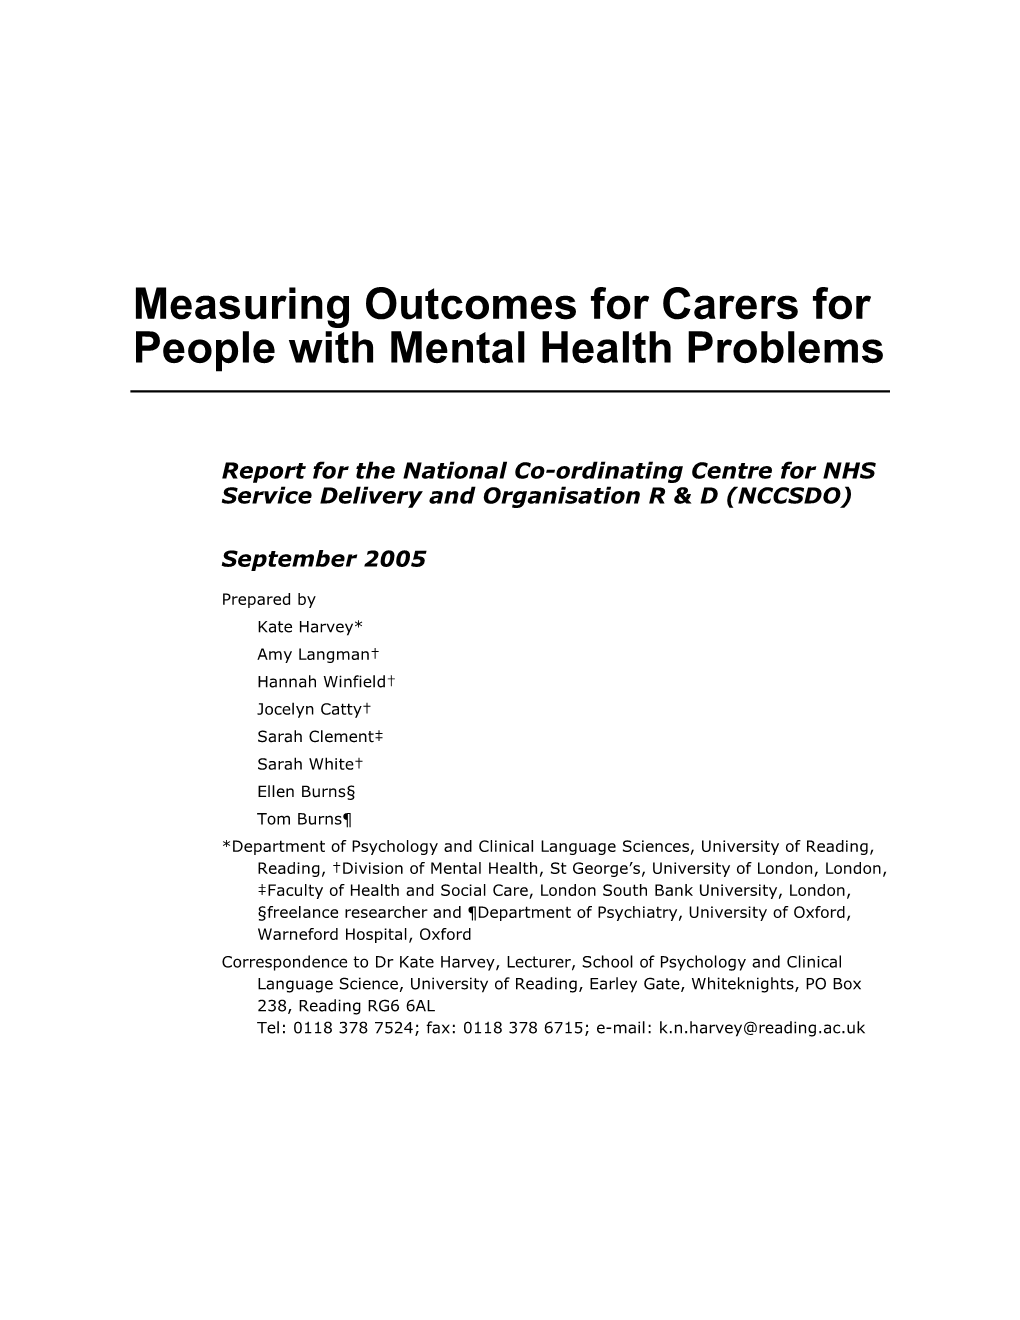 Measuring Outcomes for Carers for People with Mental Health Problems